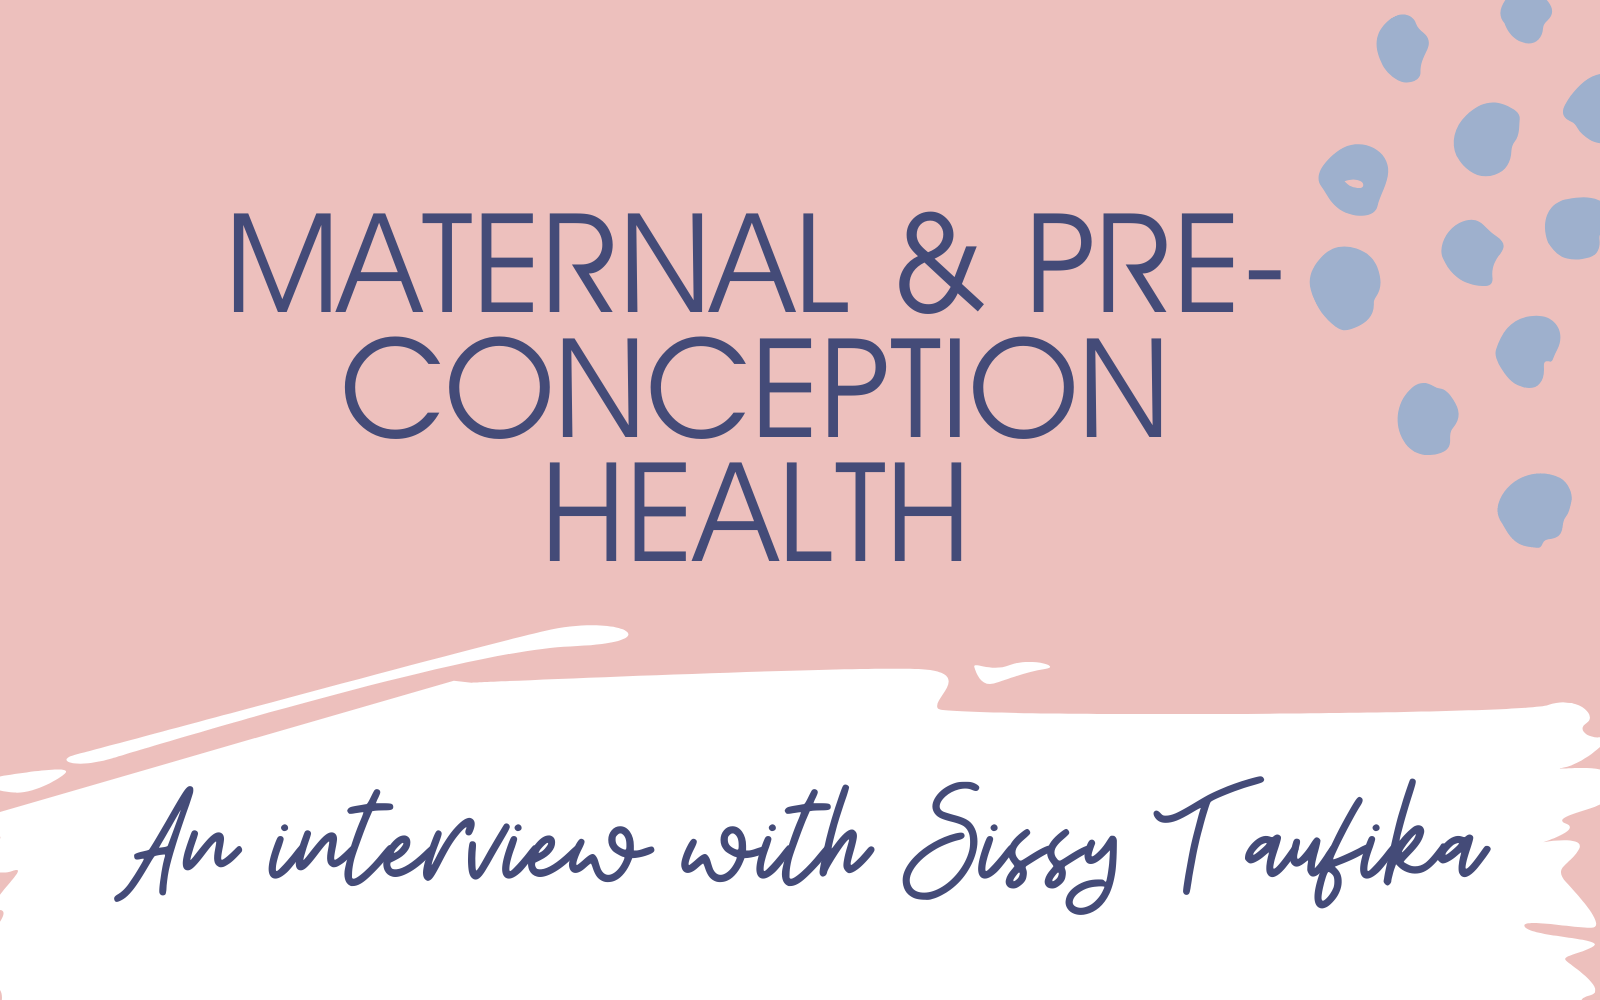 Maternal & pre-conception health: Interview with Physiotherapist Sissy Taufika